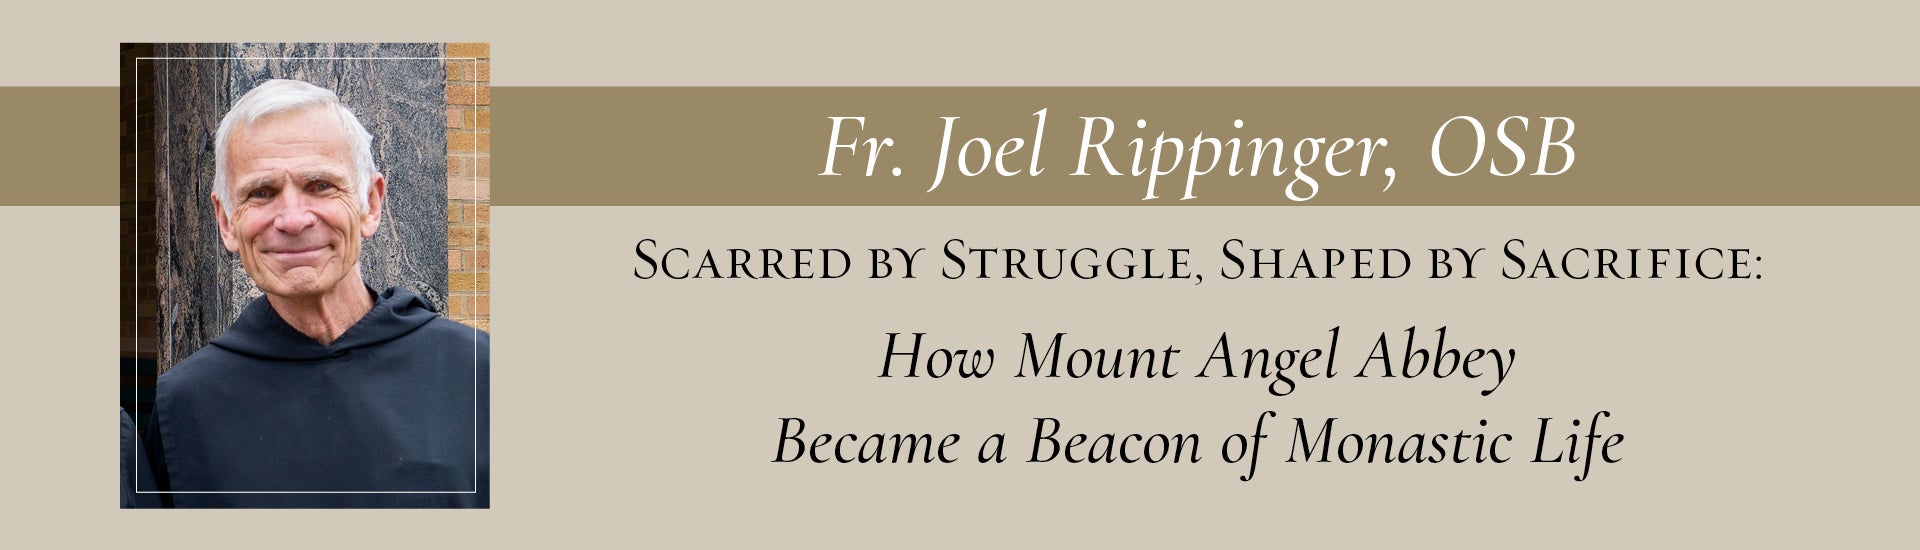 Fr. Joel Rippinger, OSB Scarred by Struggle, Shaped by Sacrifice: How Mount Angel Abbey Became a Beacon of Monastic Life